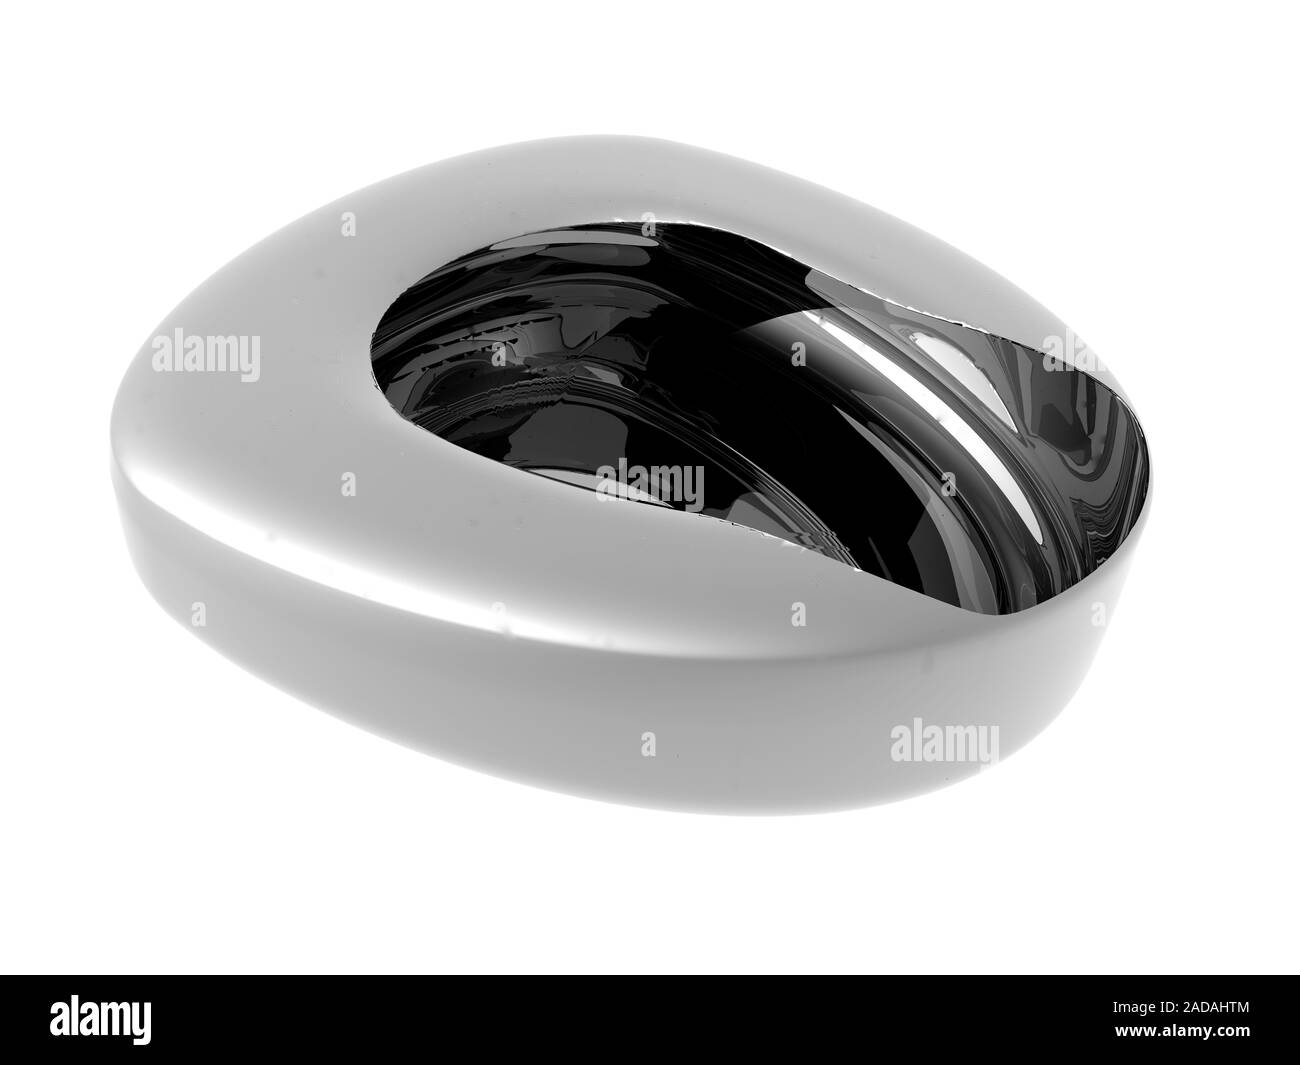 Stainless steel bedpan Stock Photo